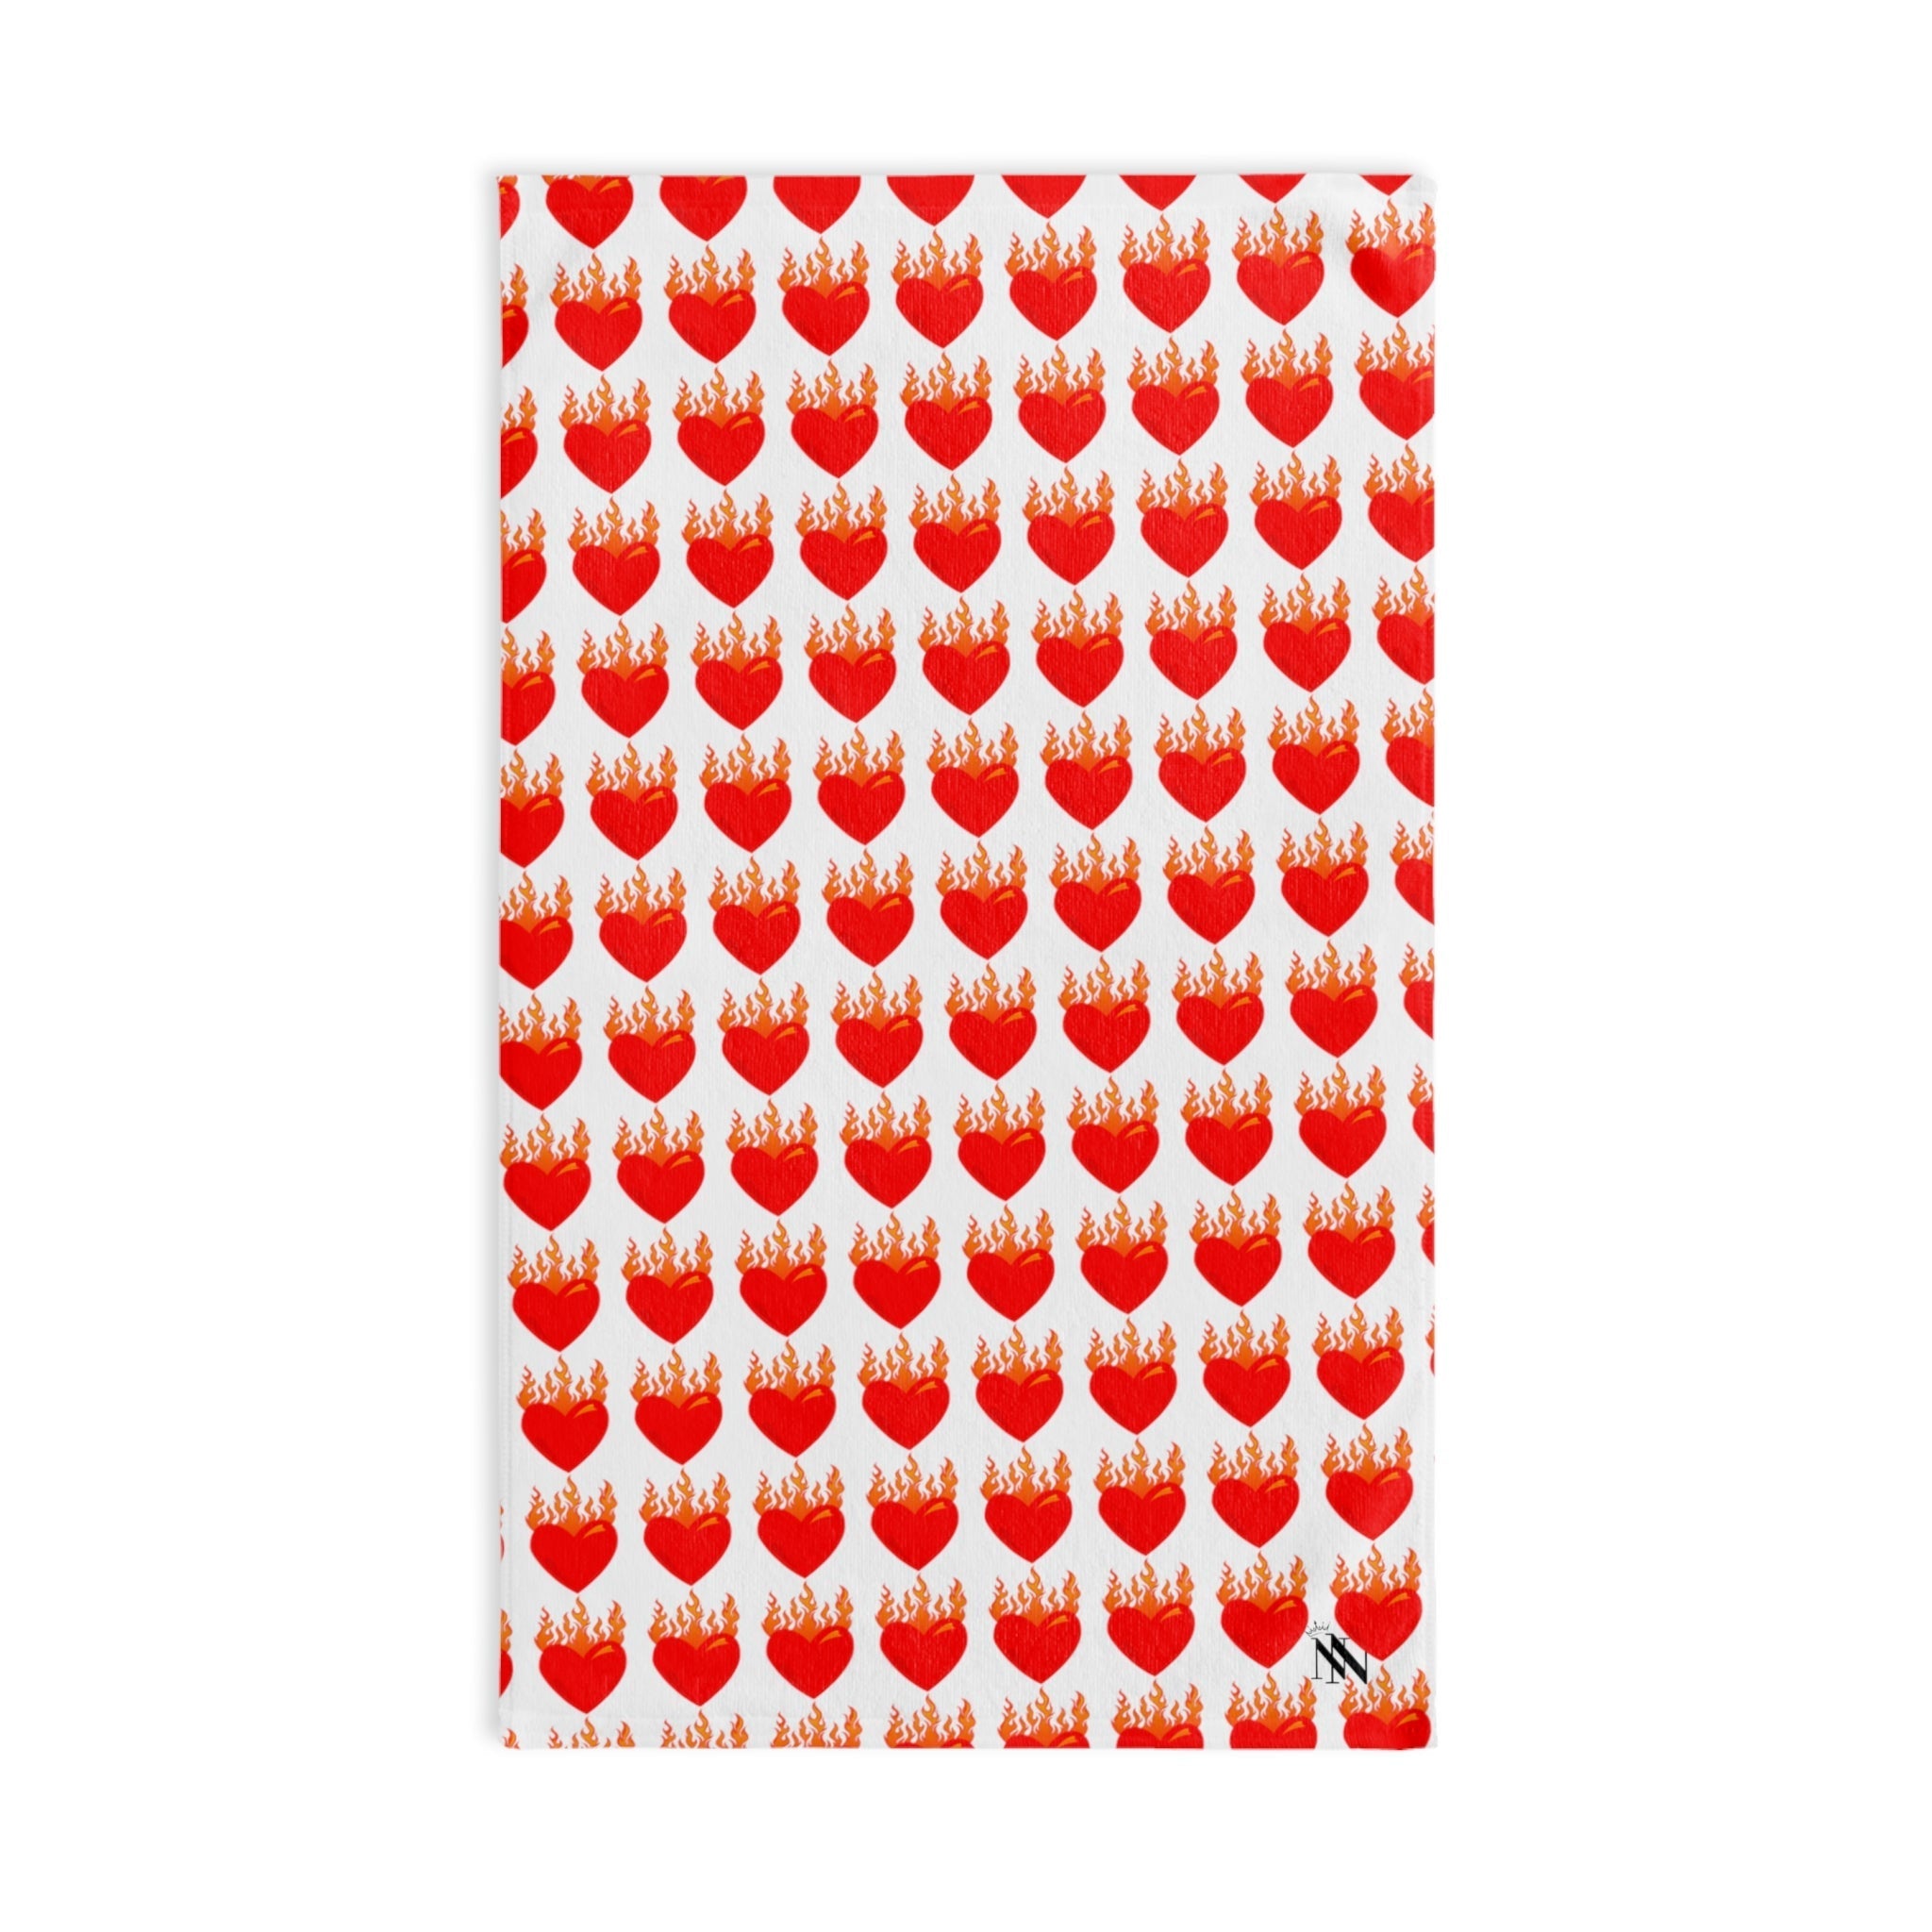 Red Flaming Heart White | Funny Gifts for Men - Gifts for Him - Birthday Gifts for Men, Him, Her, Husband, Boyfriend, Girlfriend, New Couple Gifts, Fathers & Valentines Day Gifts, Christmas Gifts NECTAR NAPKINS